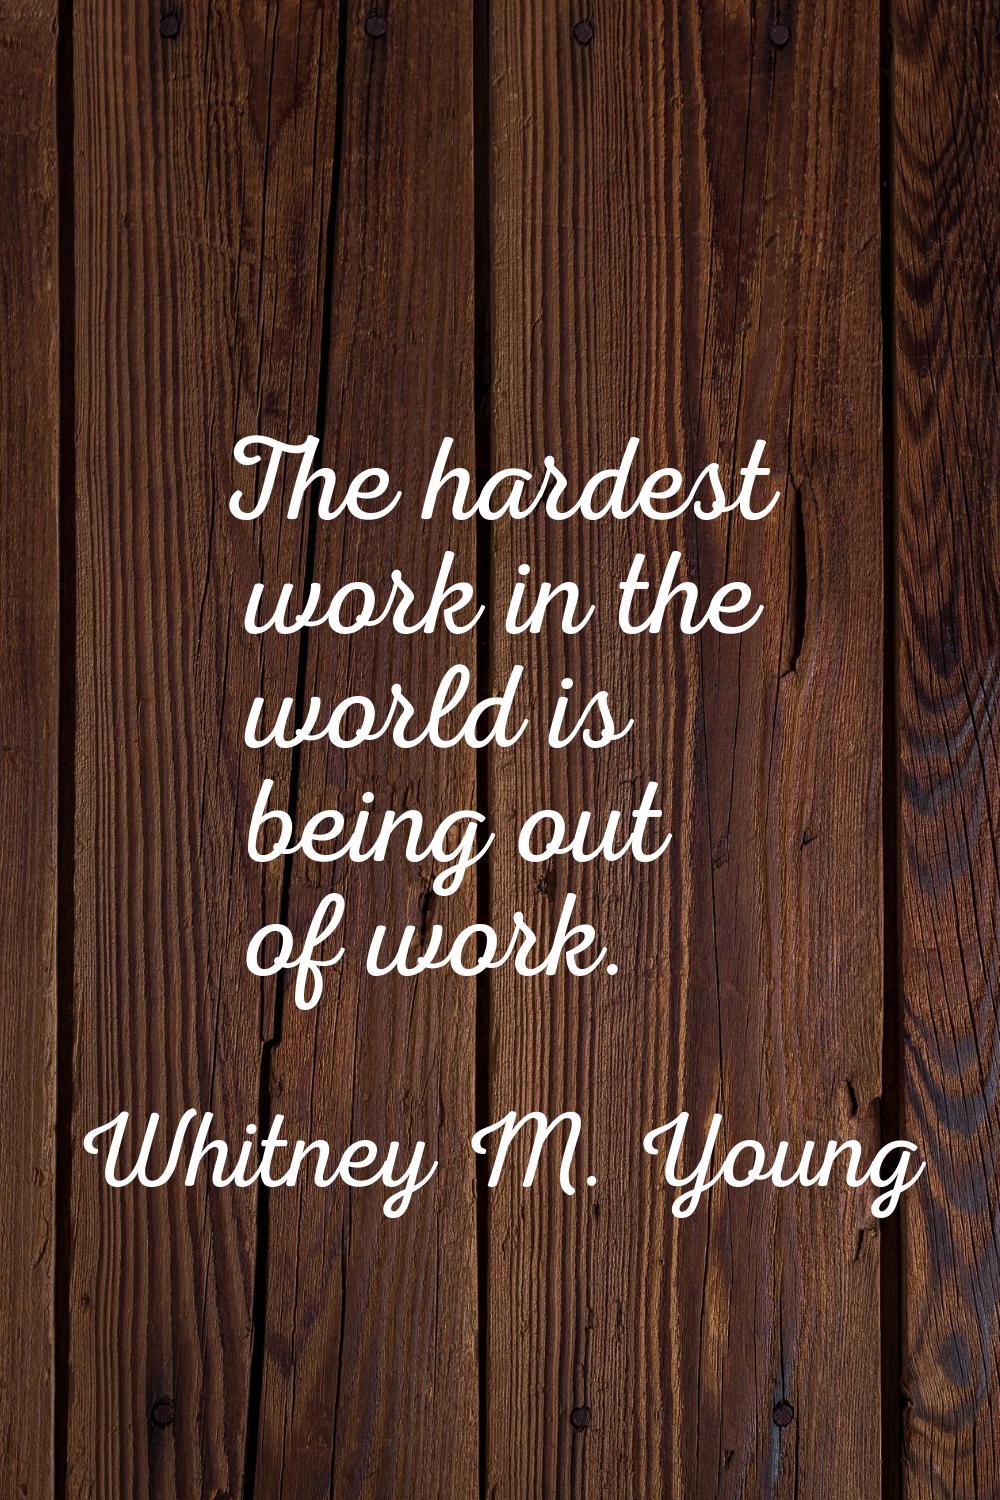 The hardest work in the world is being out of work.